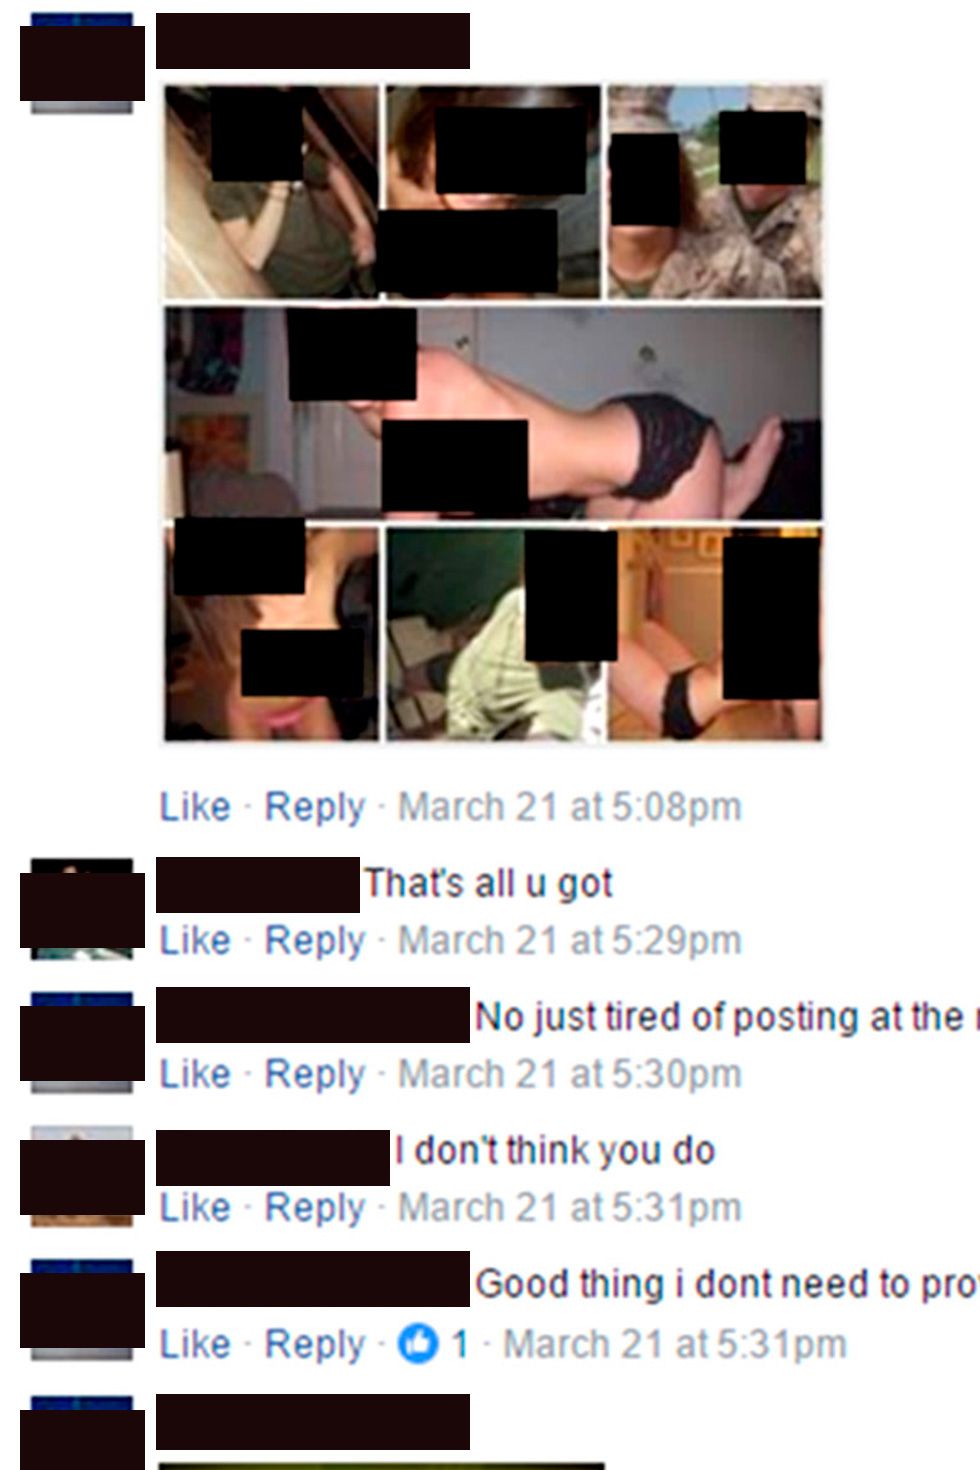 Marine Scandal Photos of Nude Female Servicewomen on Facebook Page 